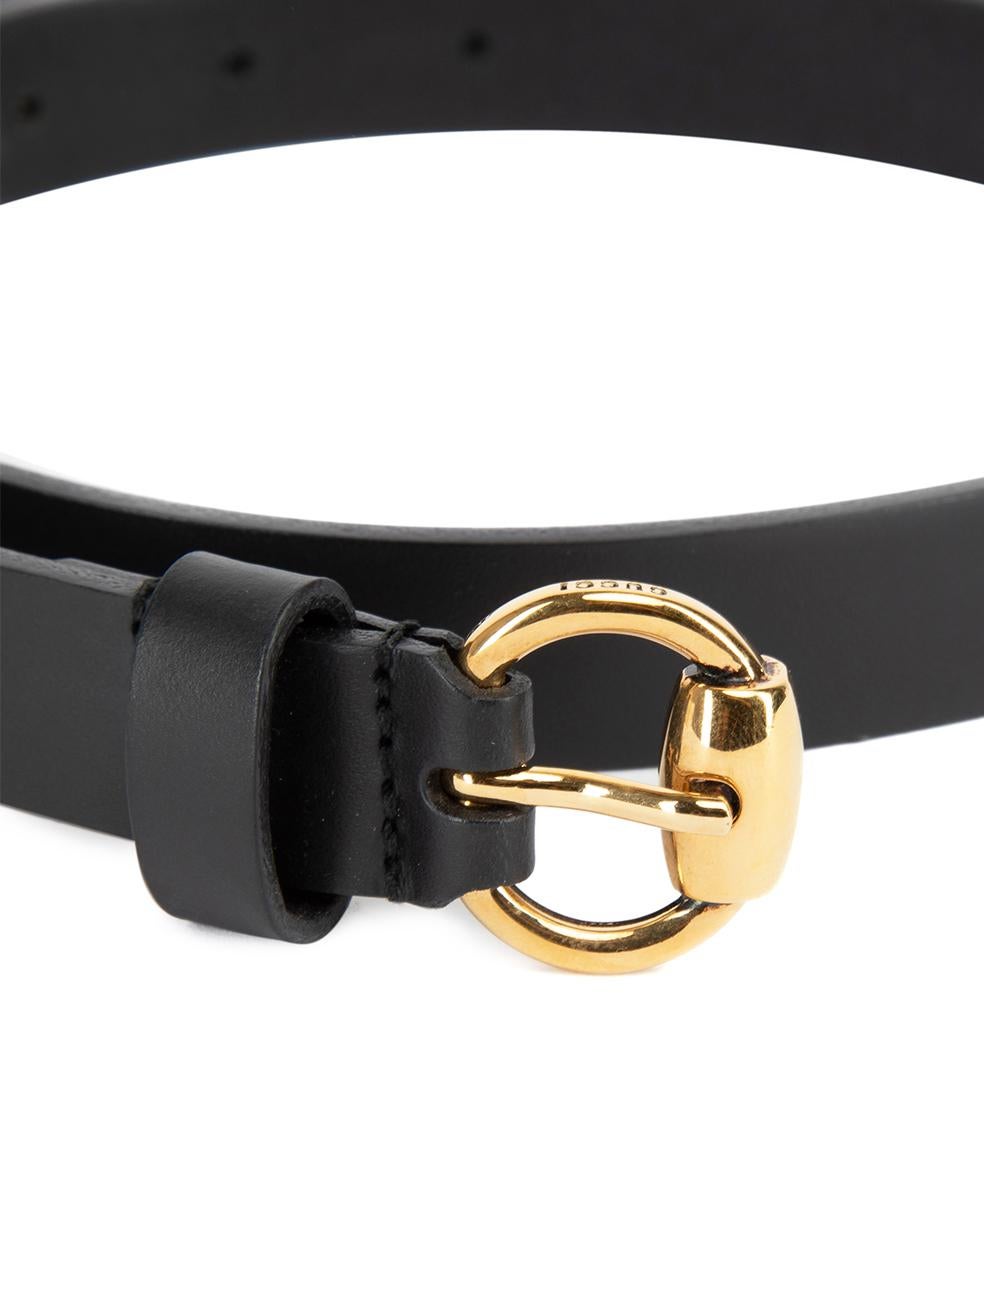 CONDITION is Very good. Hardly any visible wear is evident on this used Gucci designer resale item. Details Black Leather Skinny belt Horsebit golden buckle Made in Italy Composition Leather Size & Fit Length: 89cm/35in Width: 2cm/0. 5in Size: